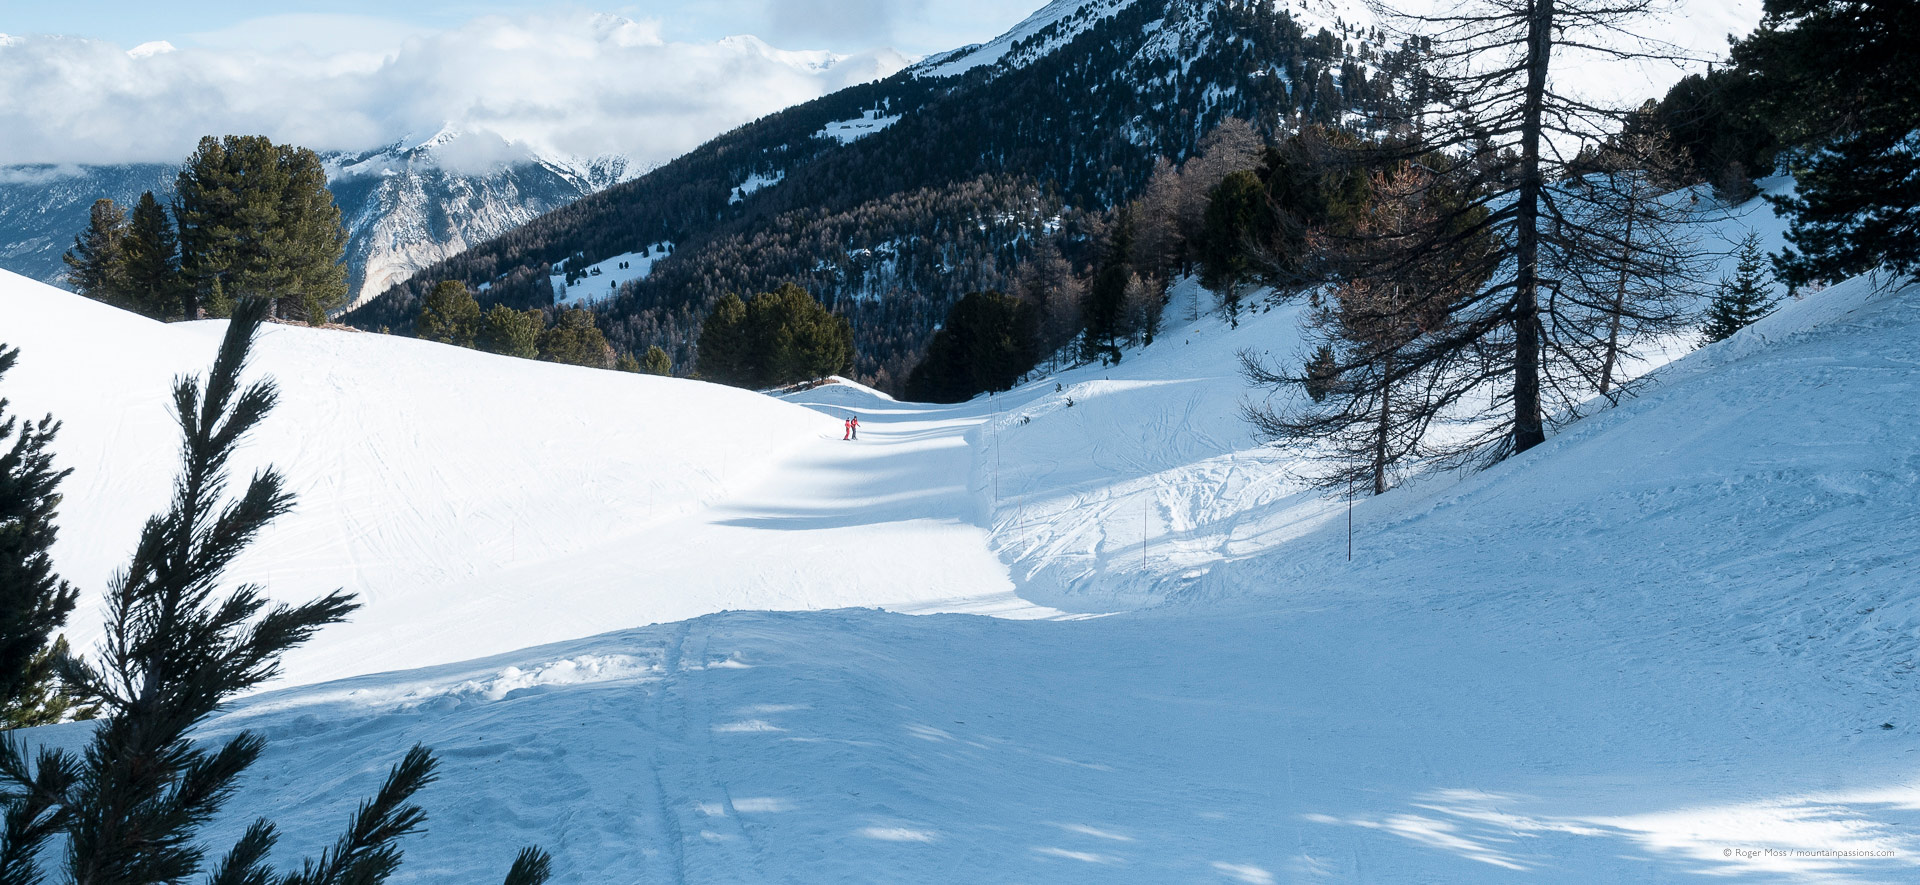 Wide view of piste with two skiers in distance.